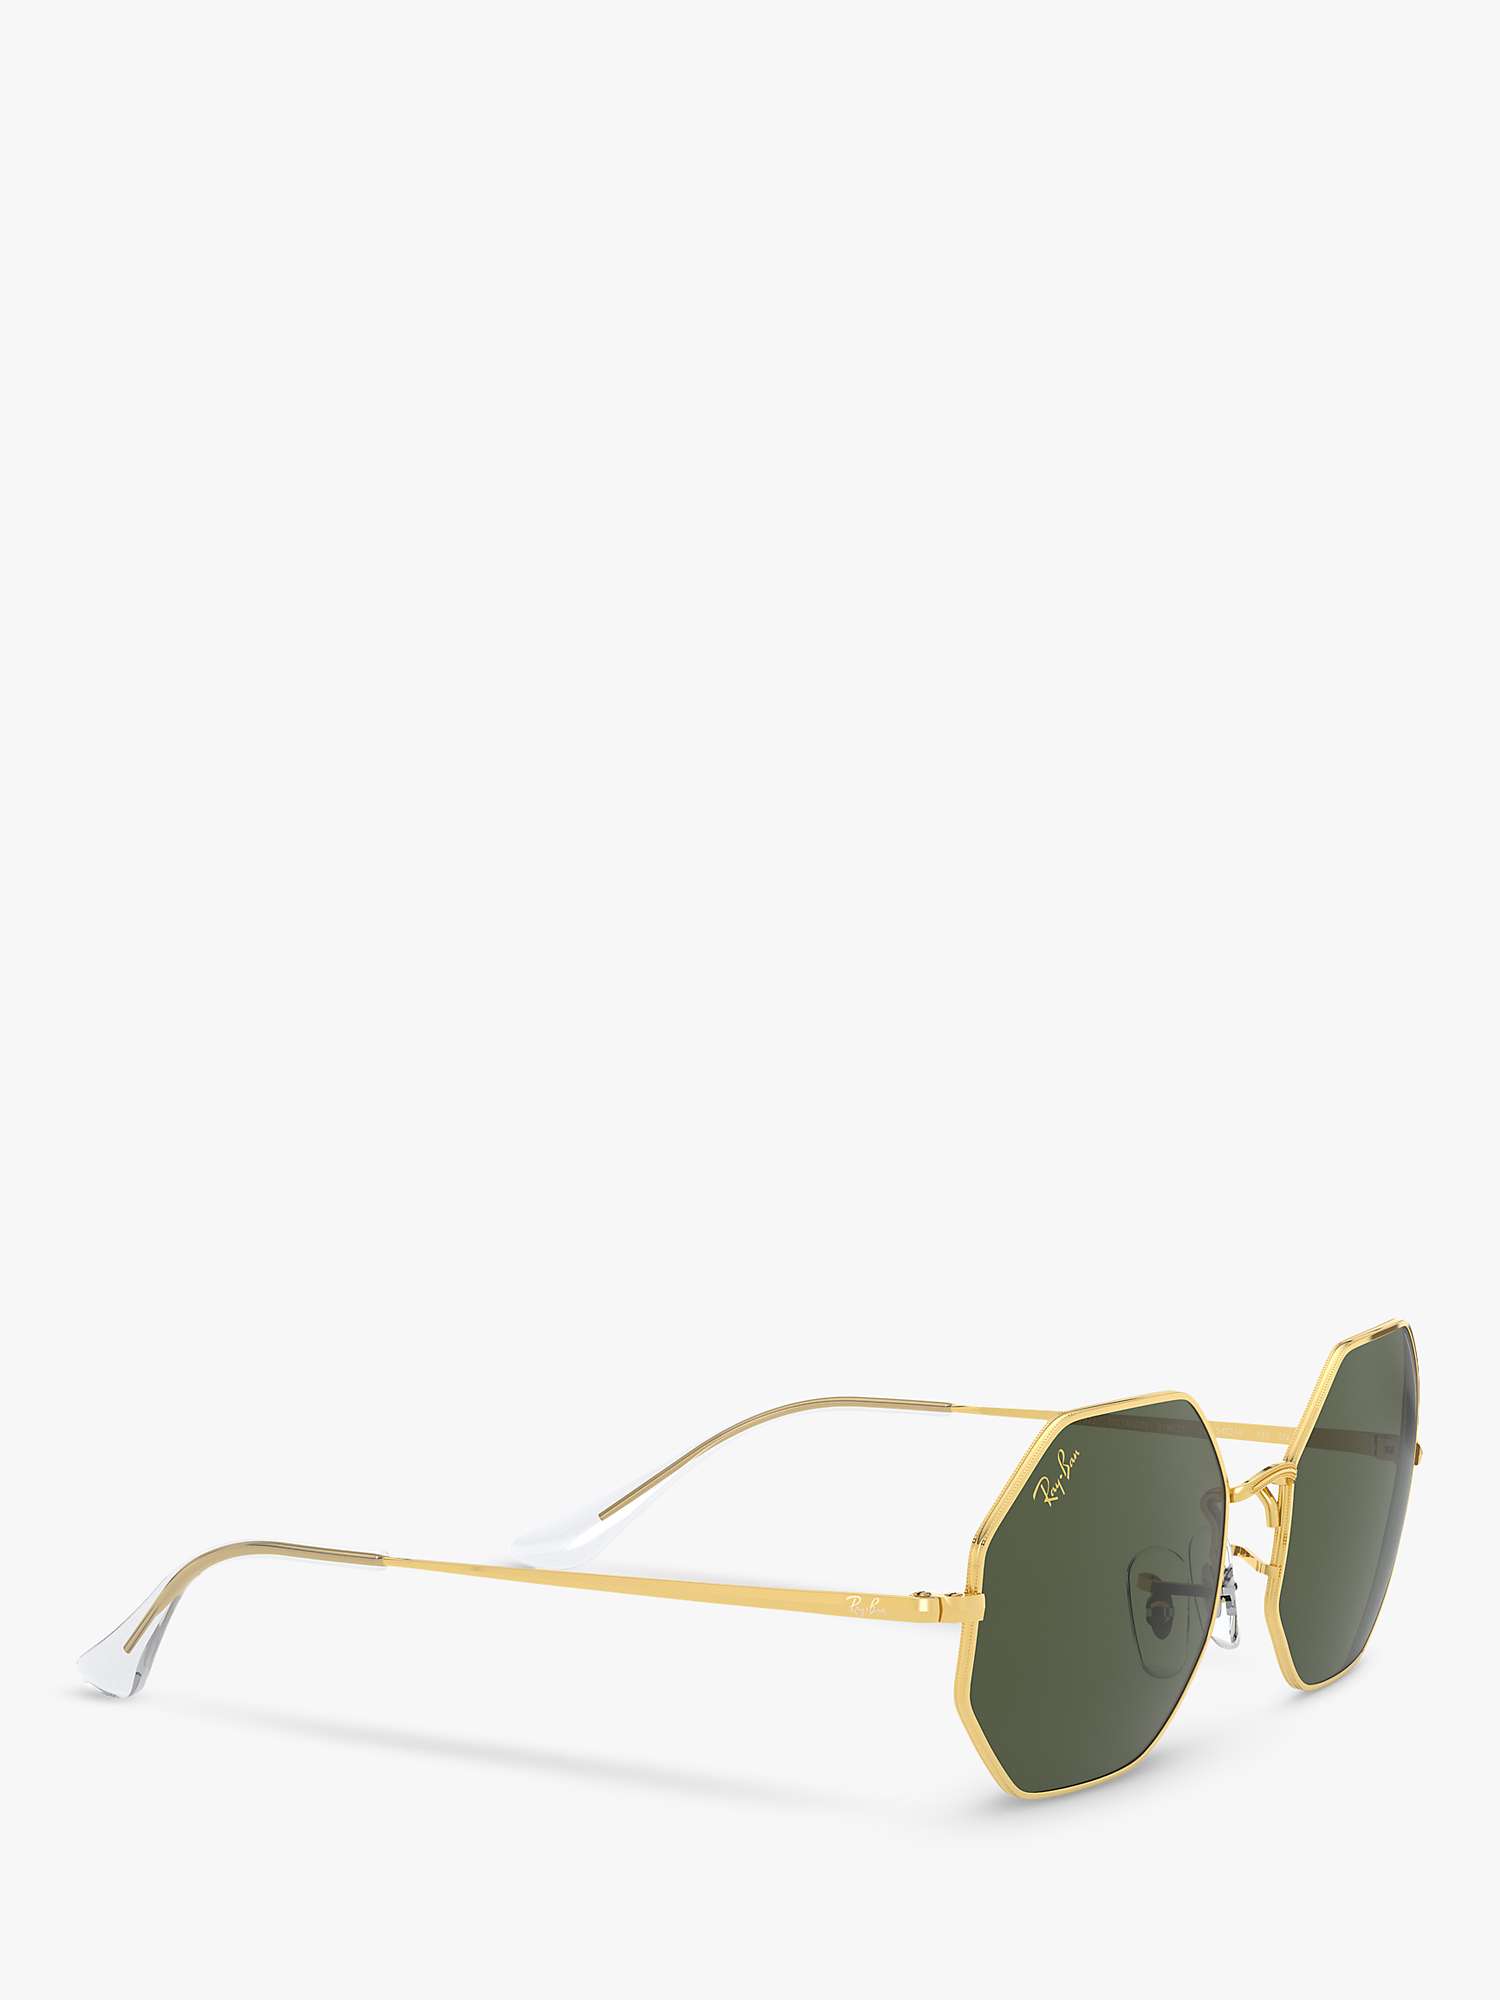 Buy Ray-Ban RB1972 Unisex Octagonal Sunglasses Online at johnlewis.com